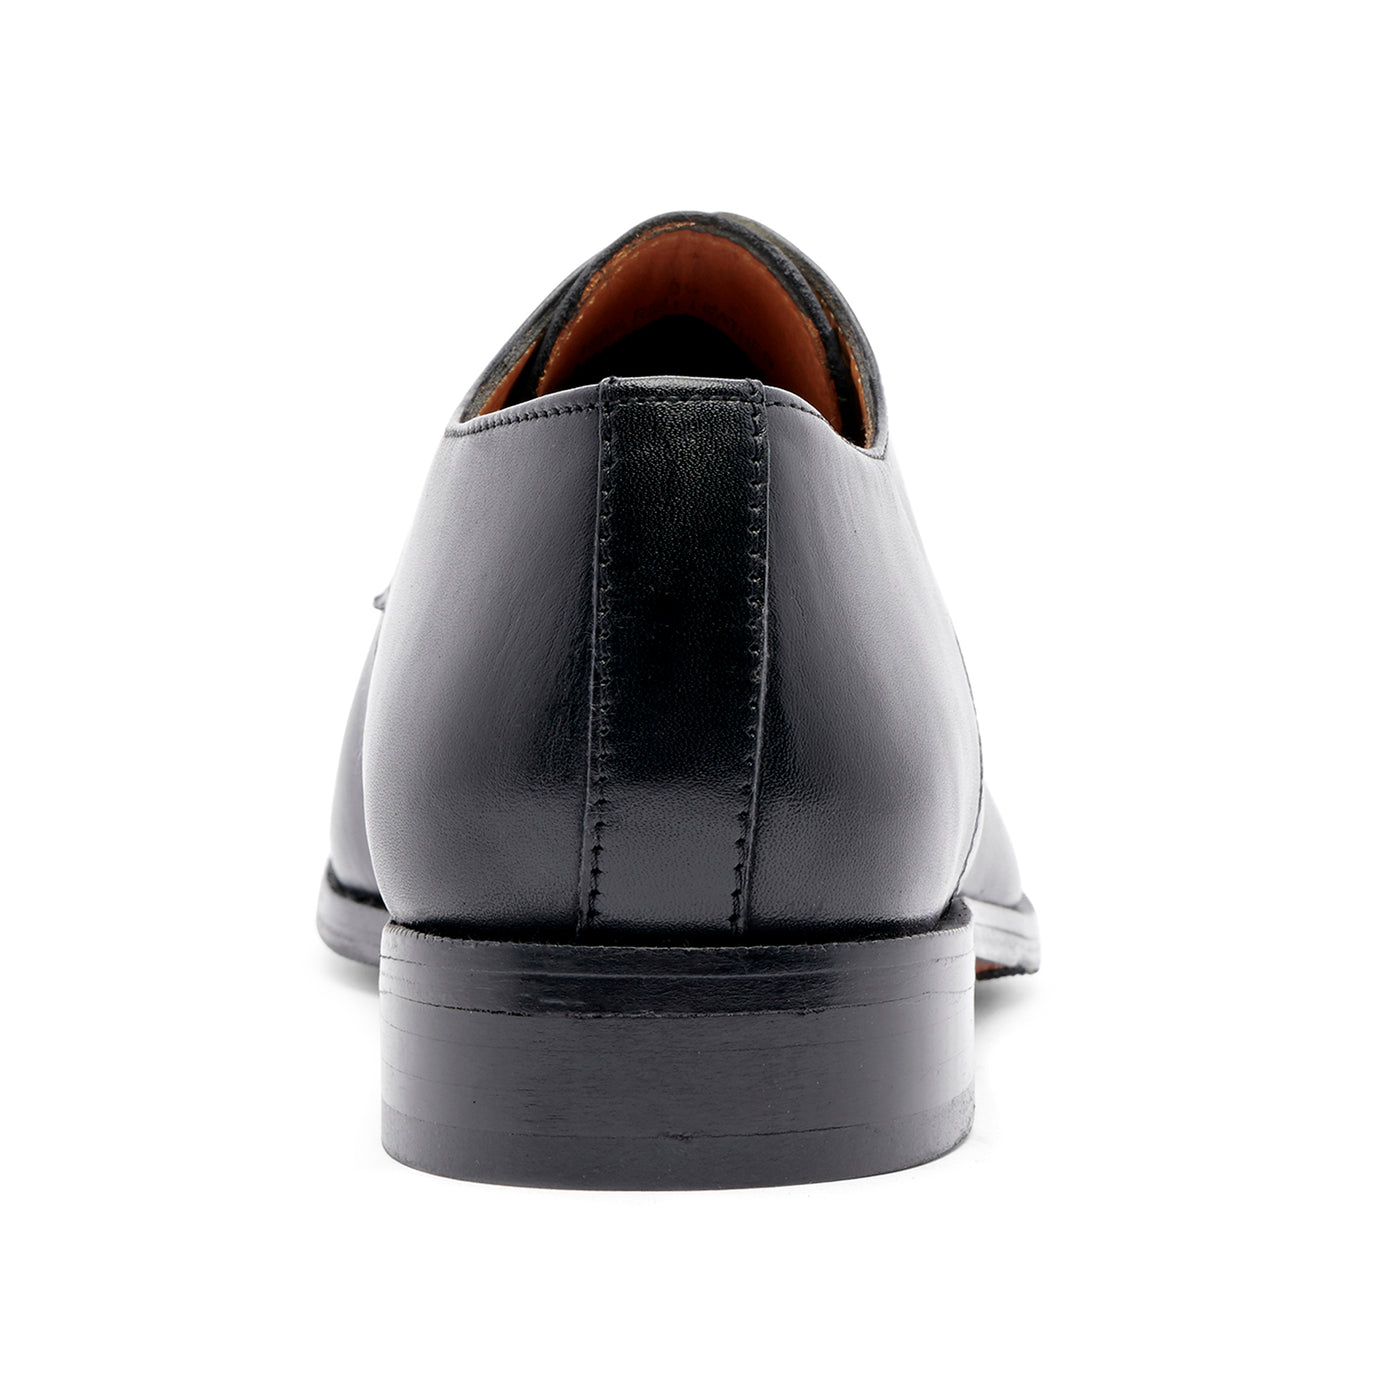 Men's Derby Shoes | Handcrafted Dress Shoes | Carlos Shoes for Men